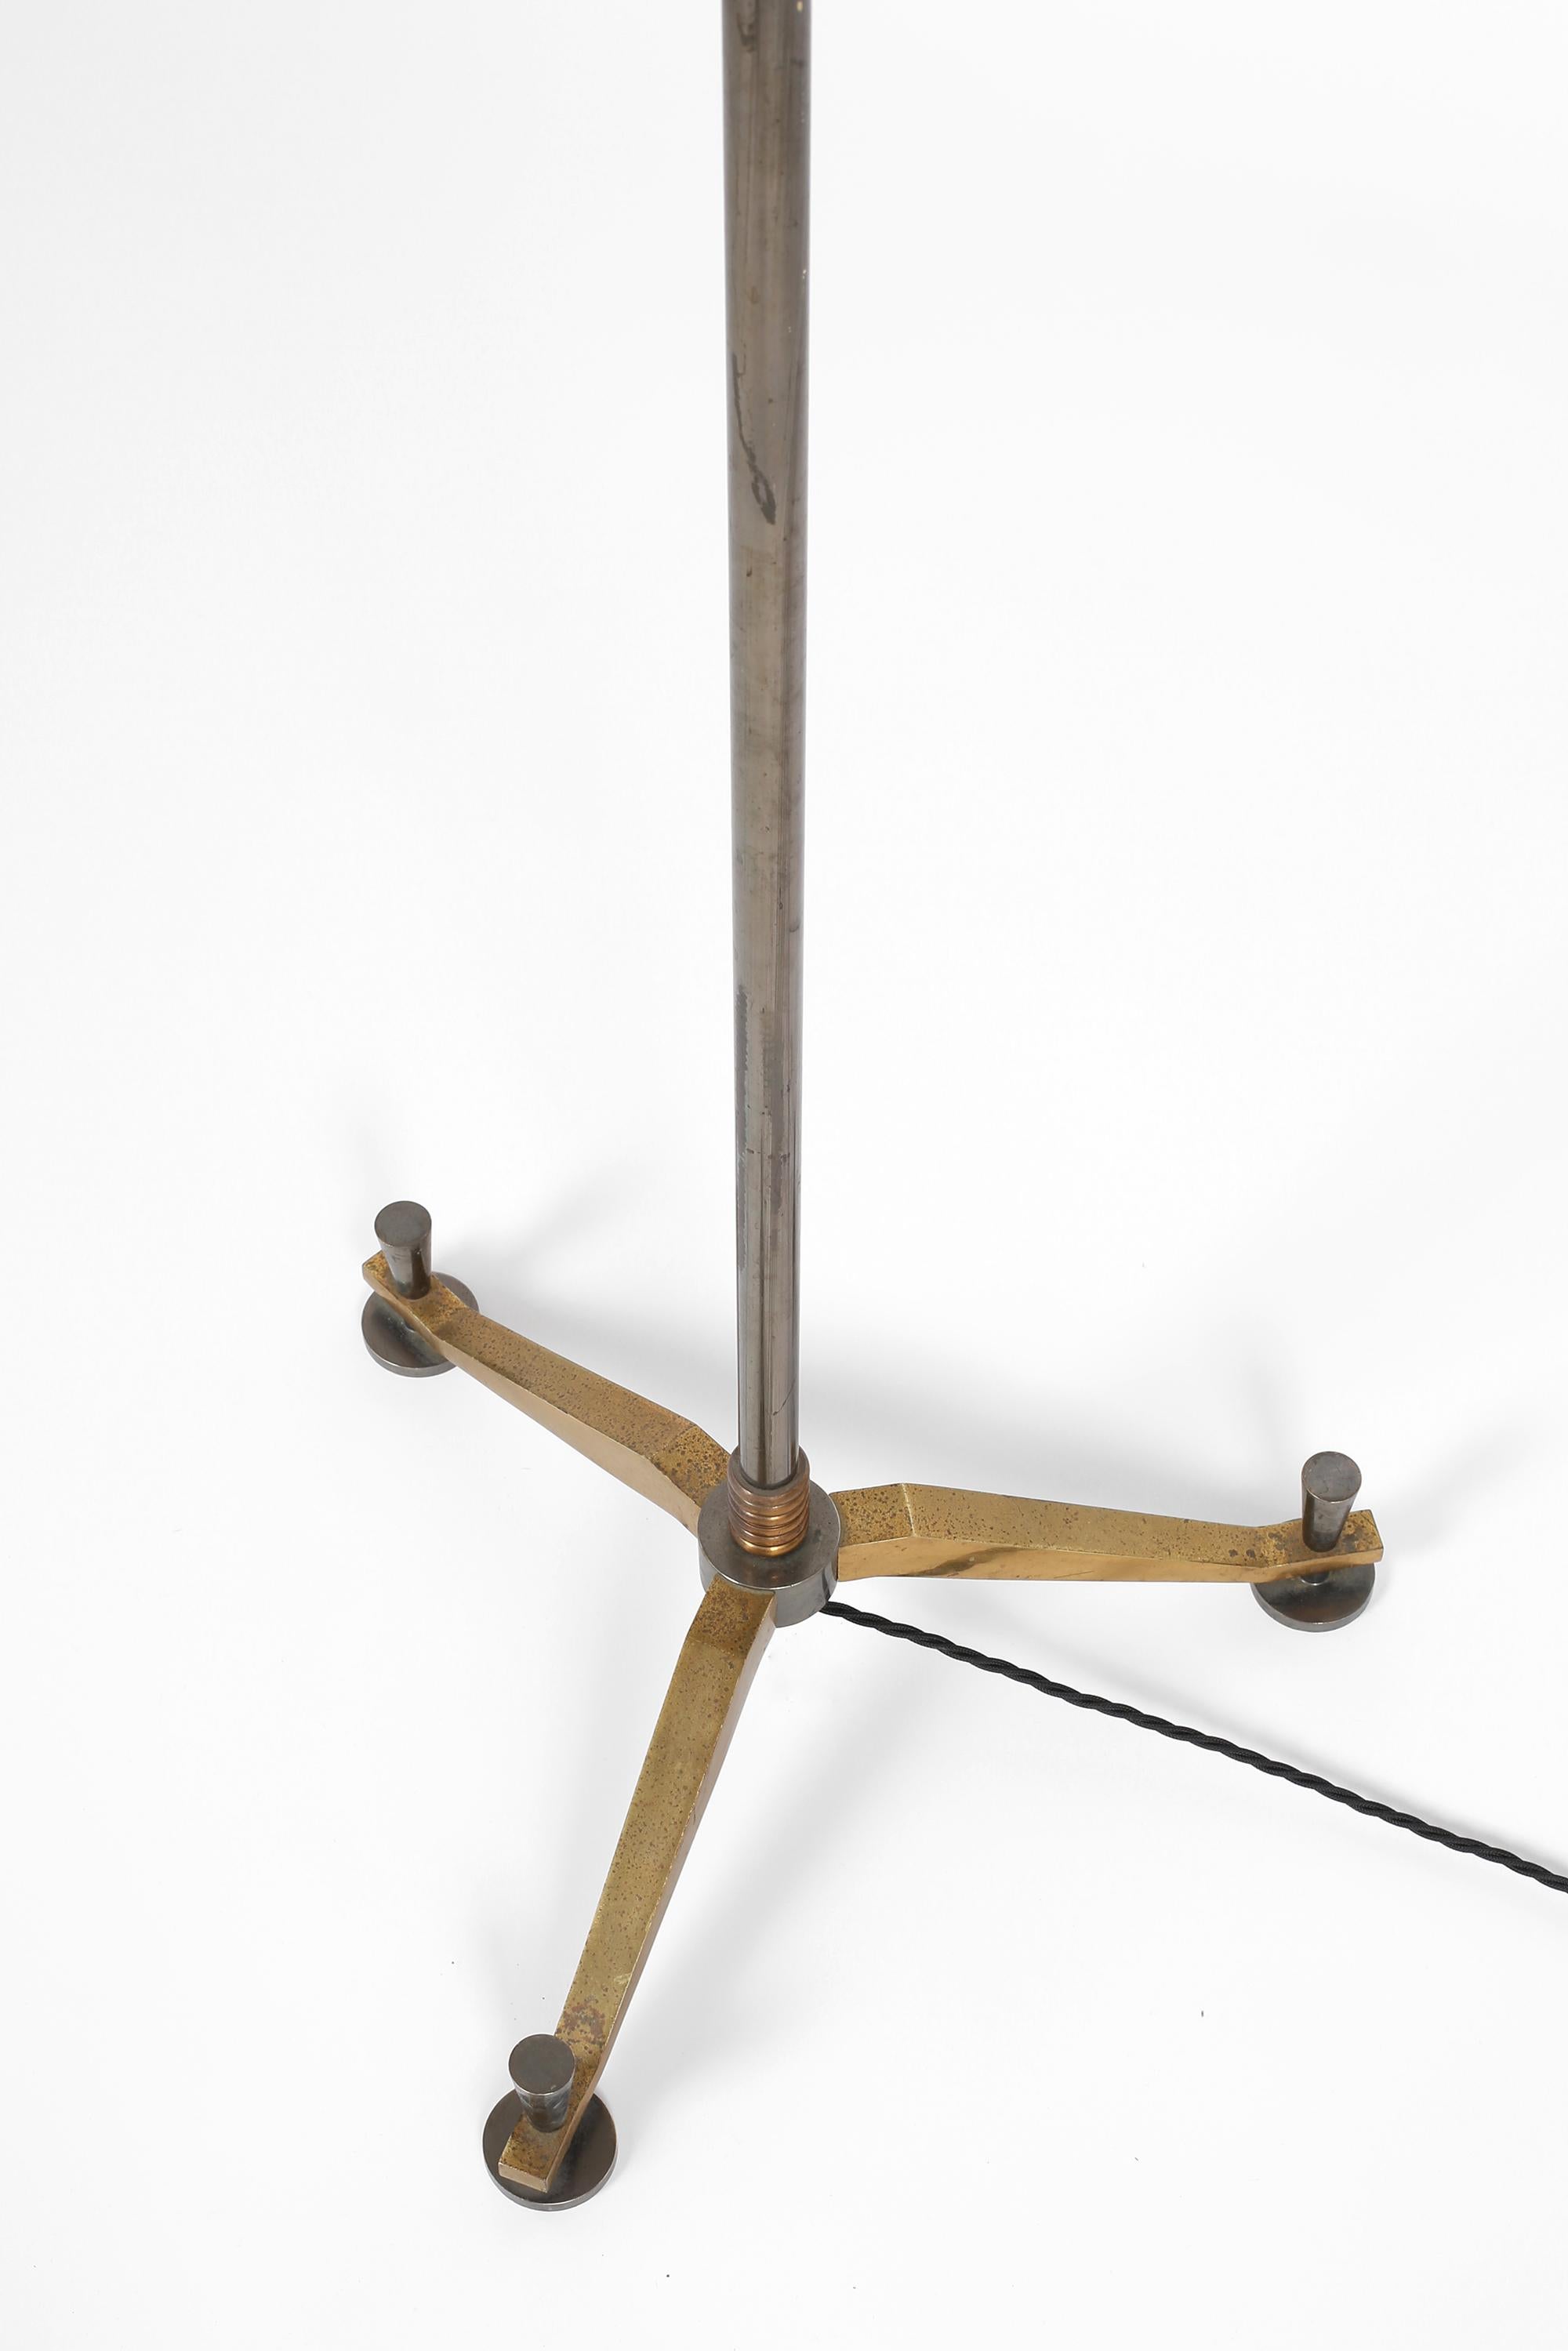 Neoclassical Floor Lamp by Henri Petitot for Atelier Petitot, French, c. 1930s For Sale 1